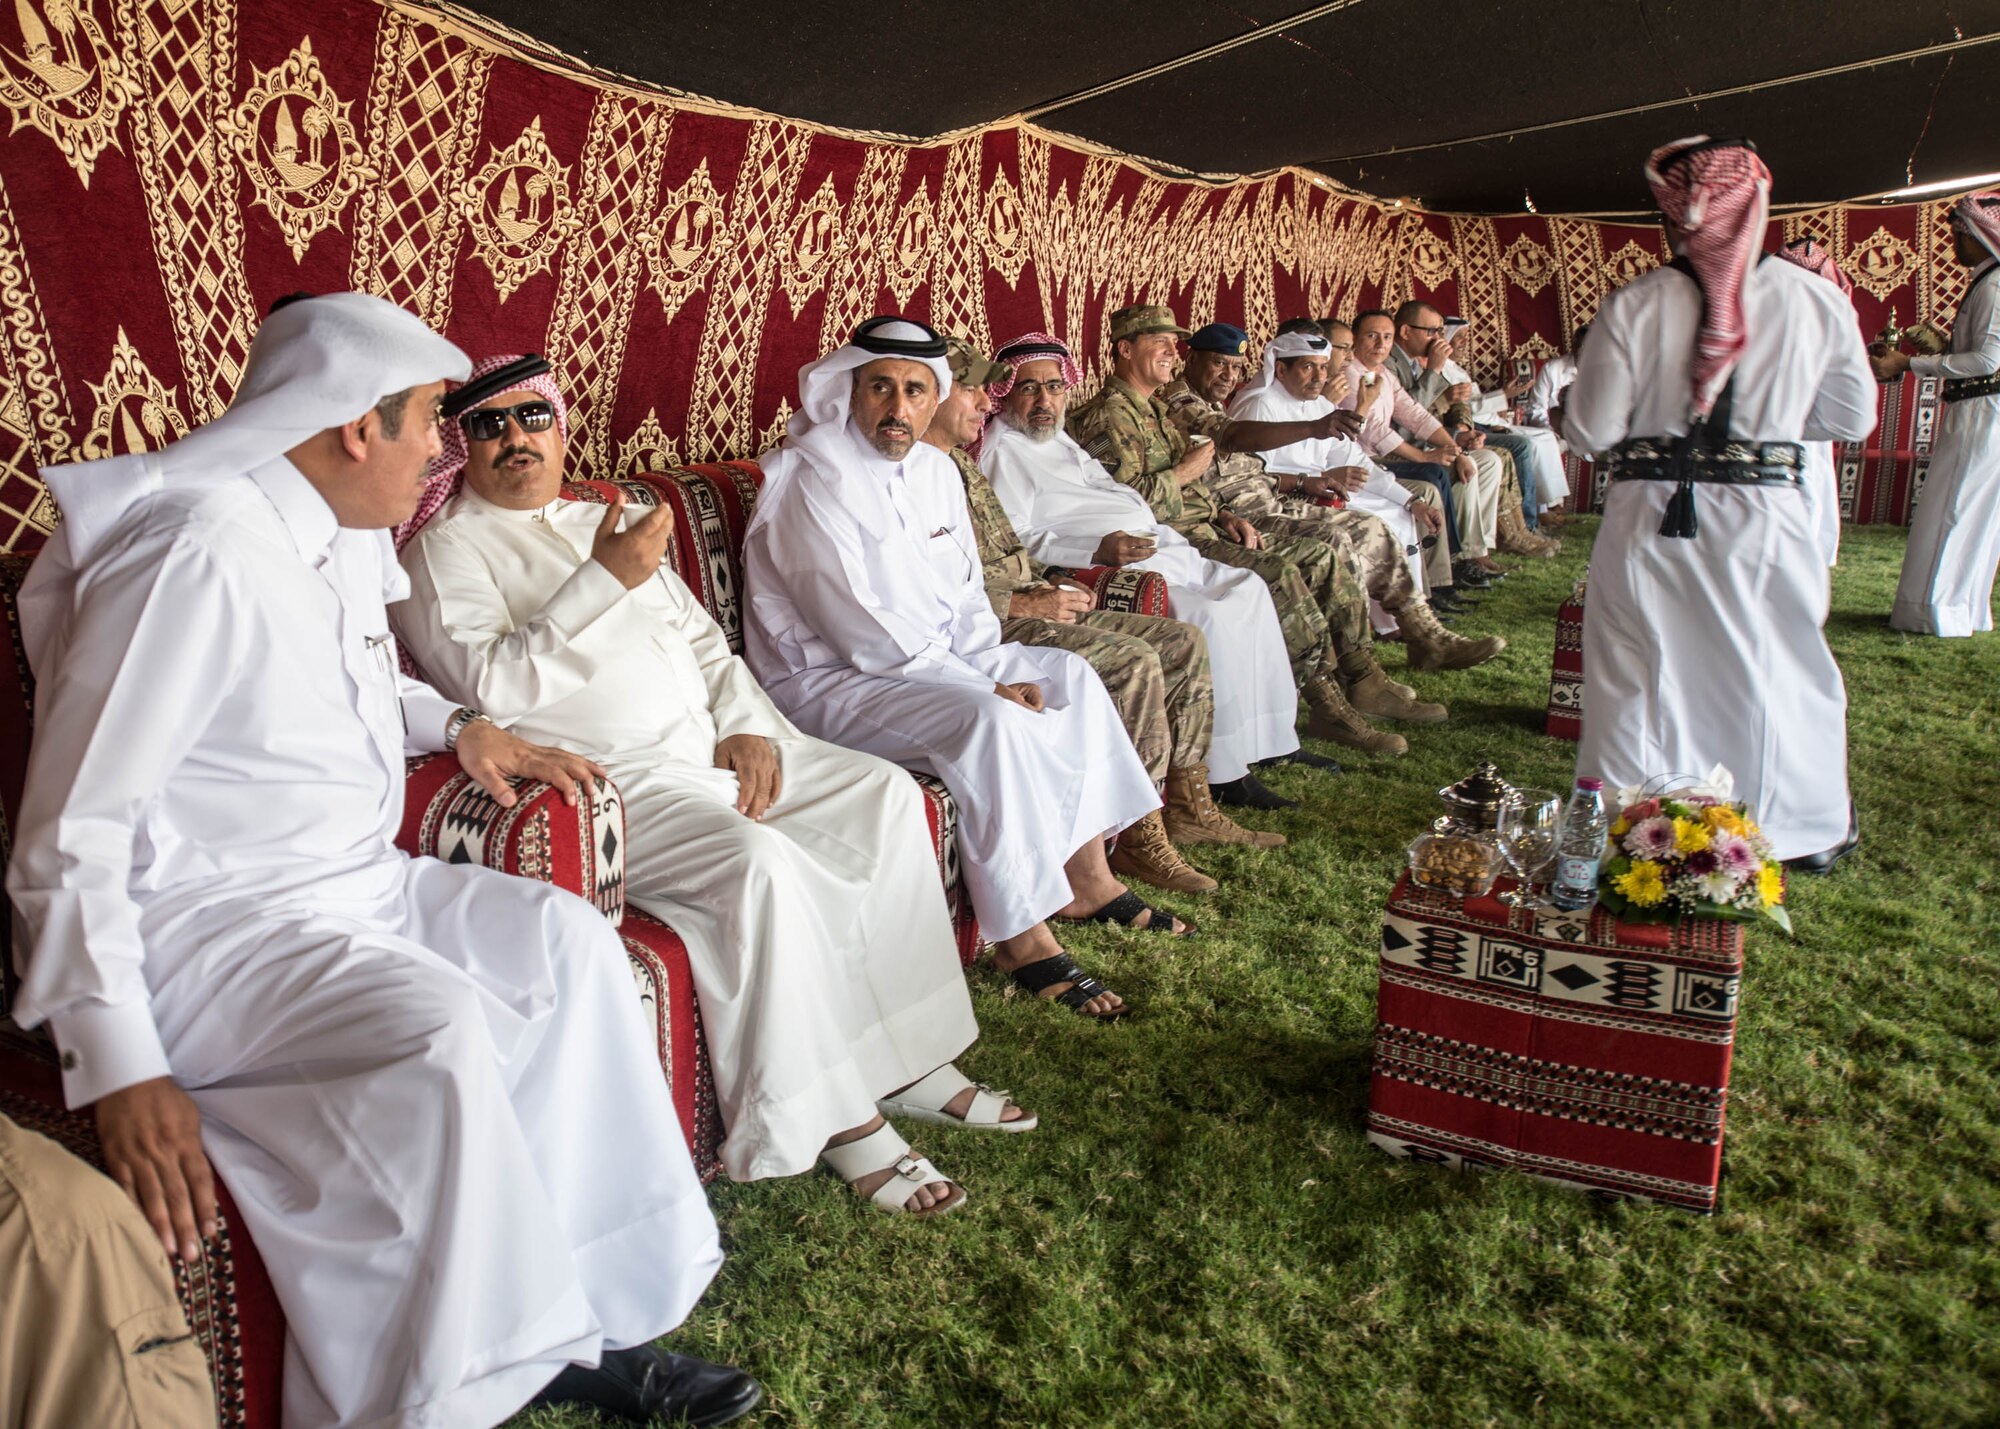 Qatar Emiri Air Force hosts a cultural exchange for coalition partners and families